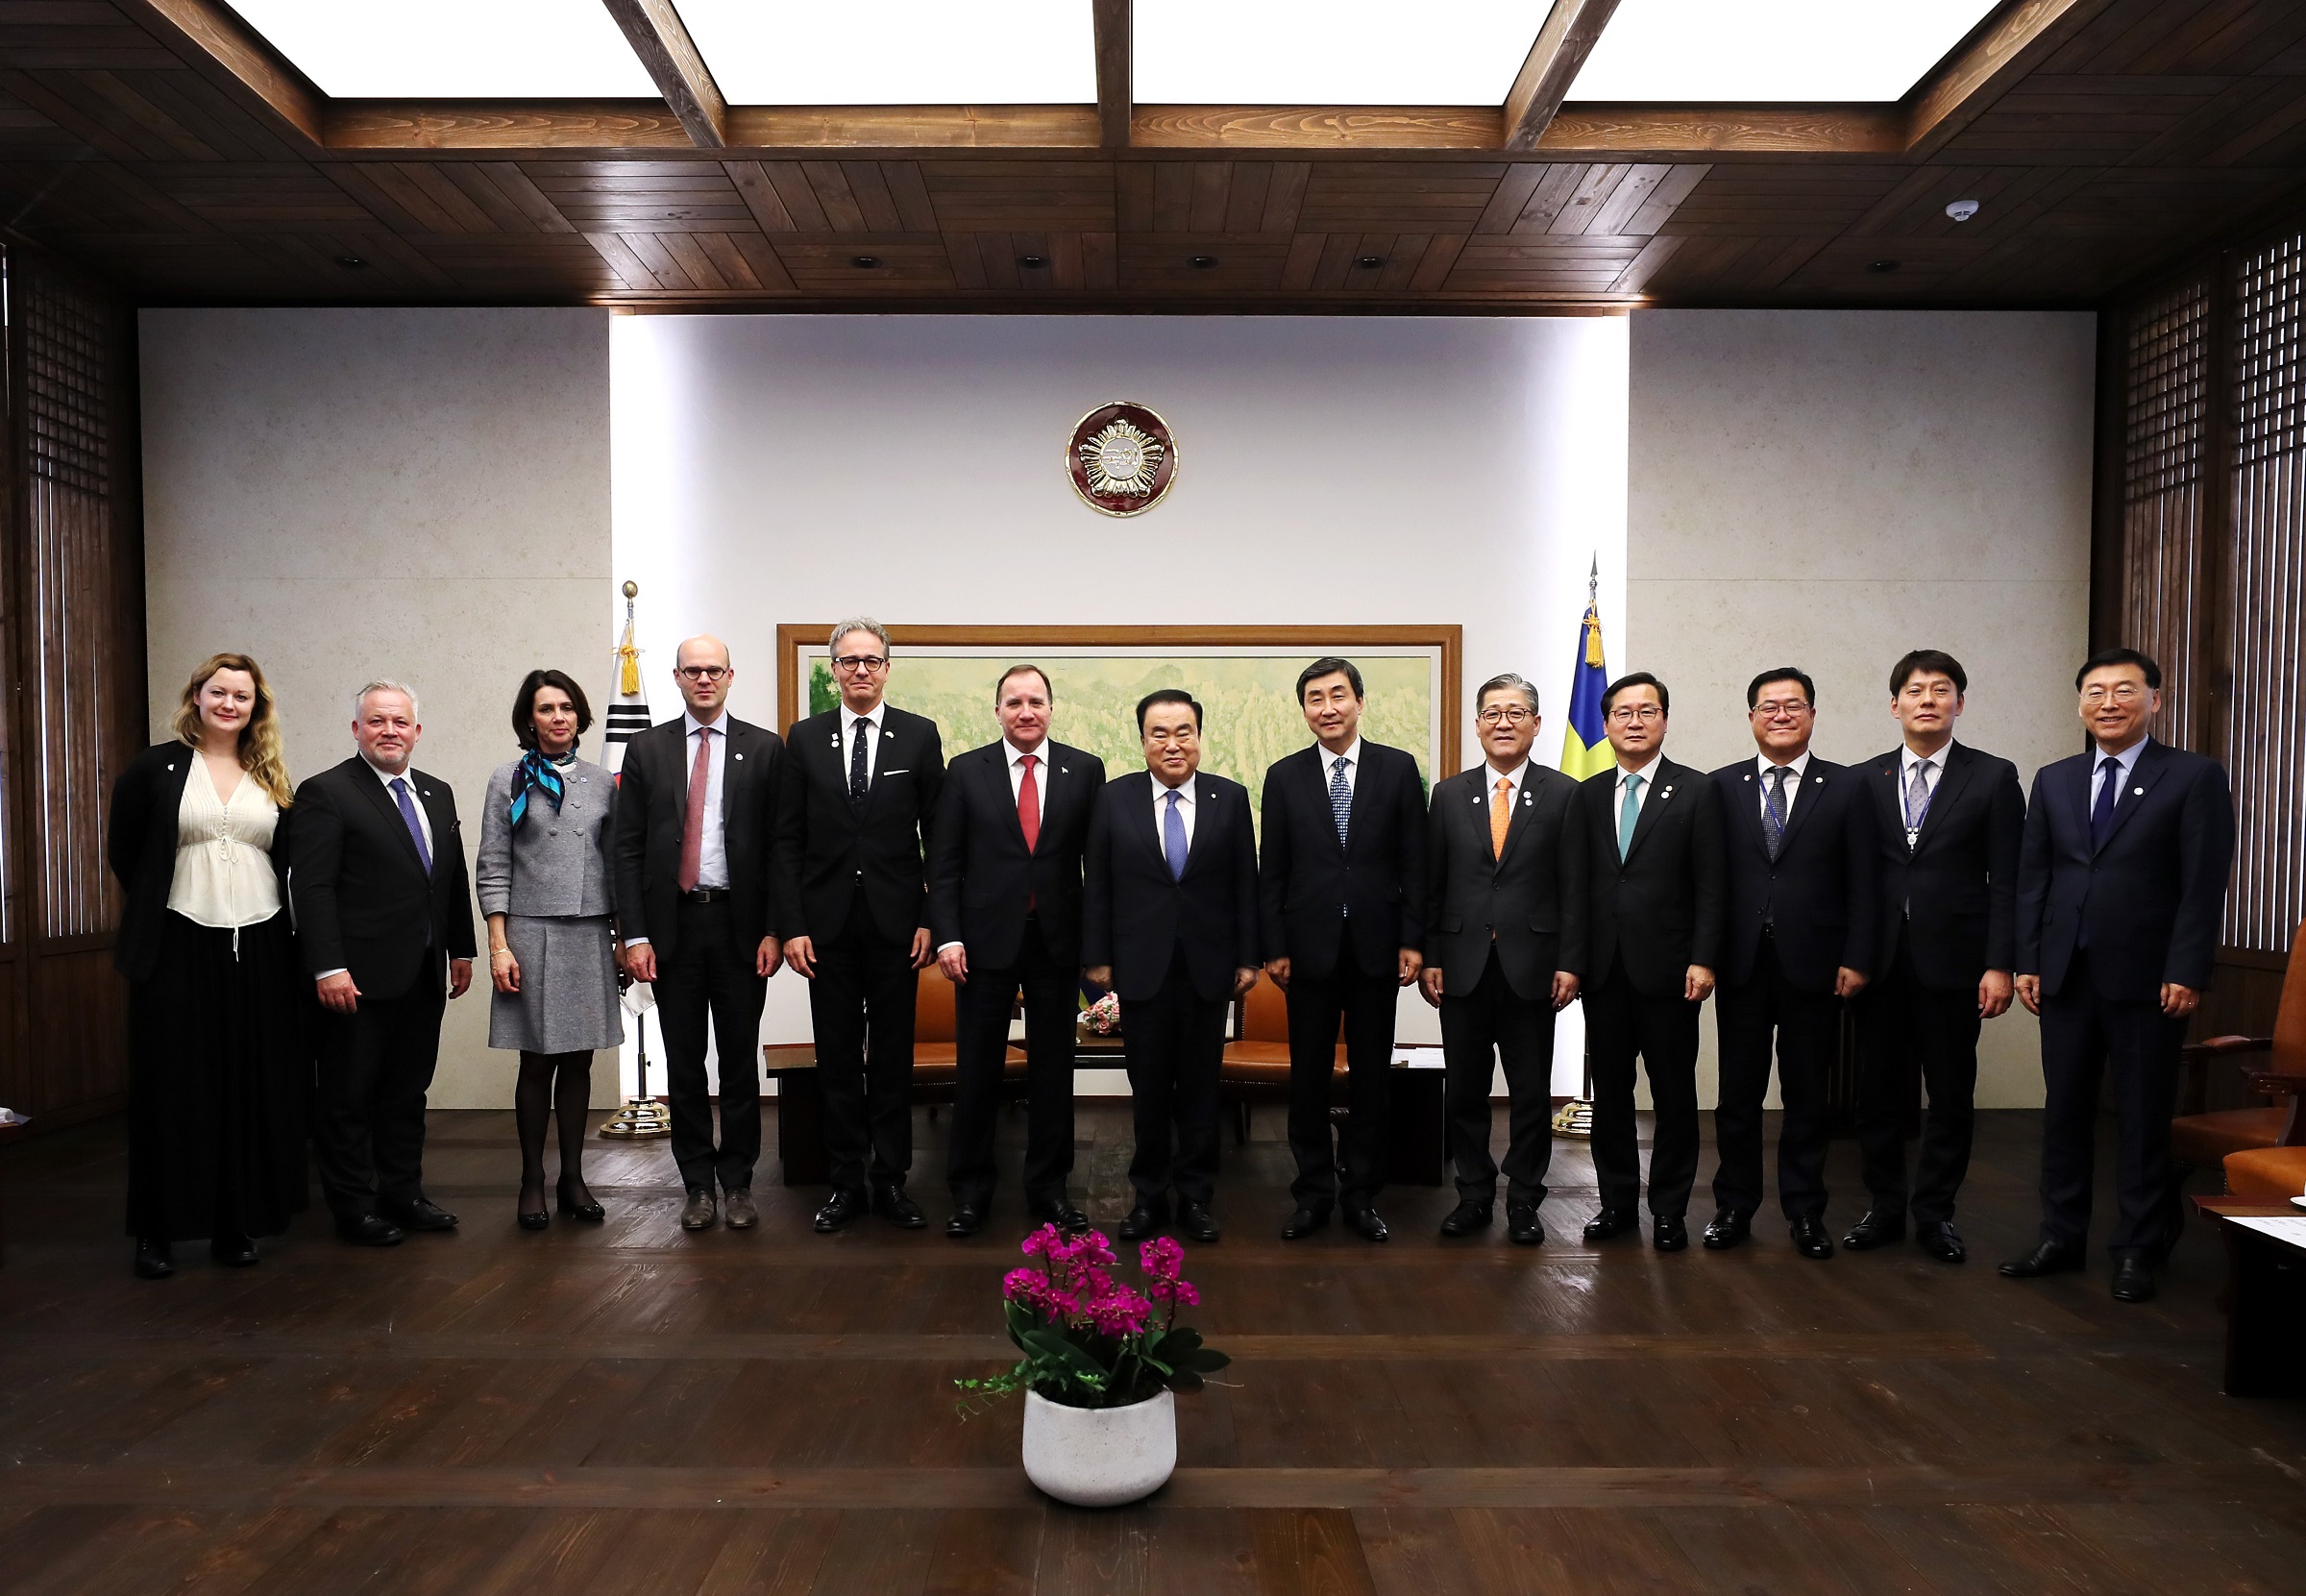 [Dec 23] Swedish Prime Minister visits the National Assembly of the Republic of Korea; Republic of Korea and Serbia sign a MoU